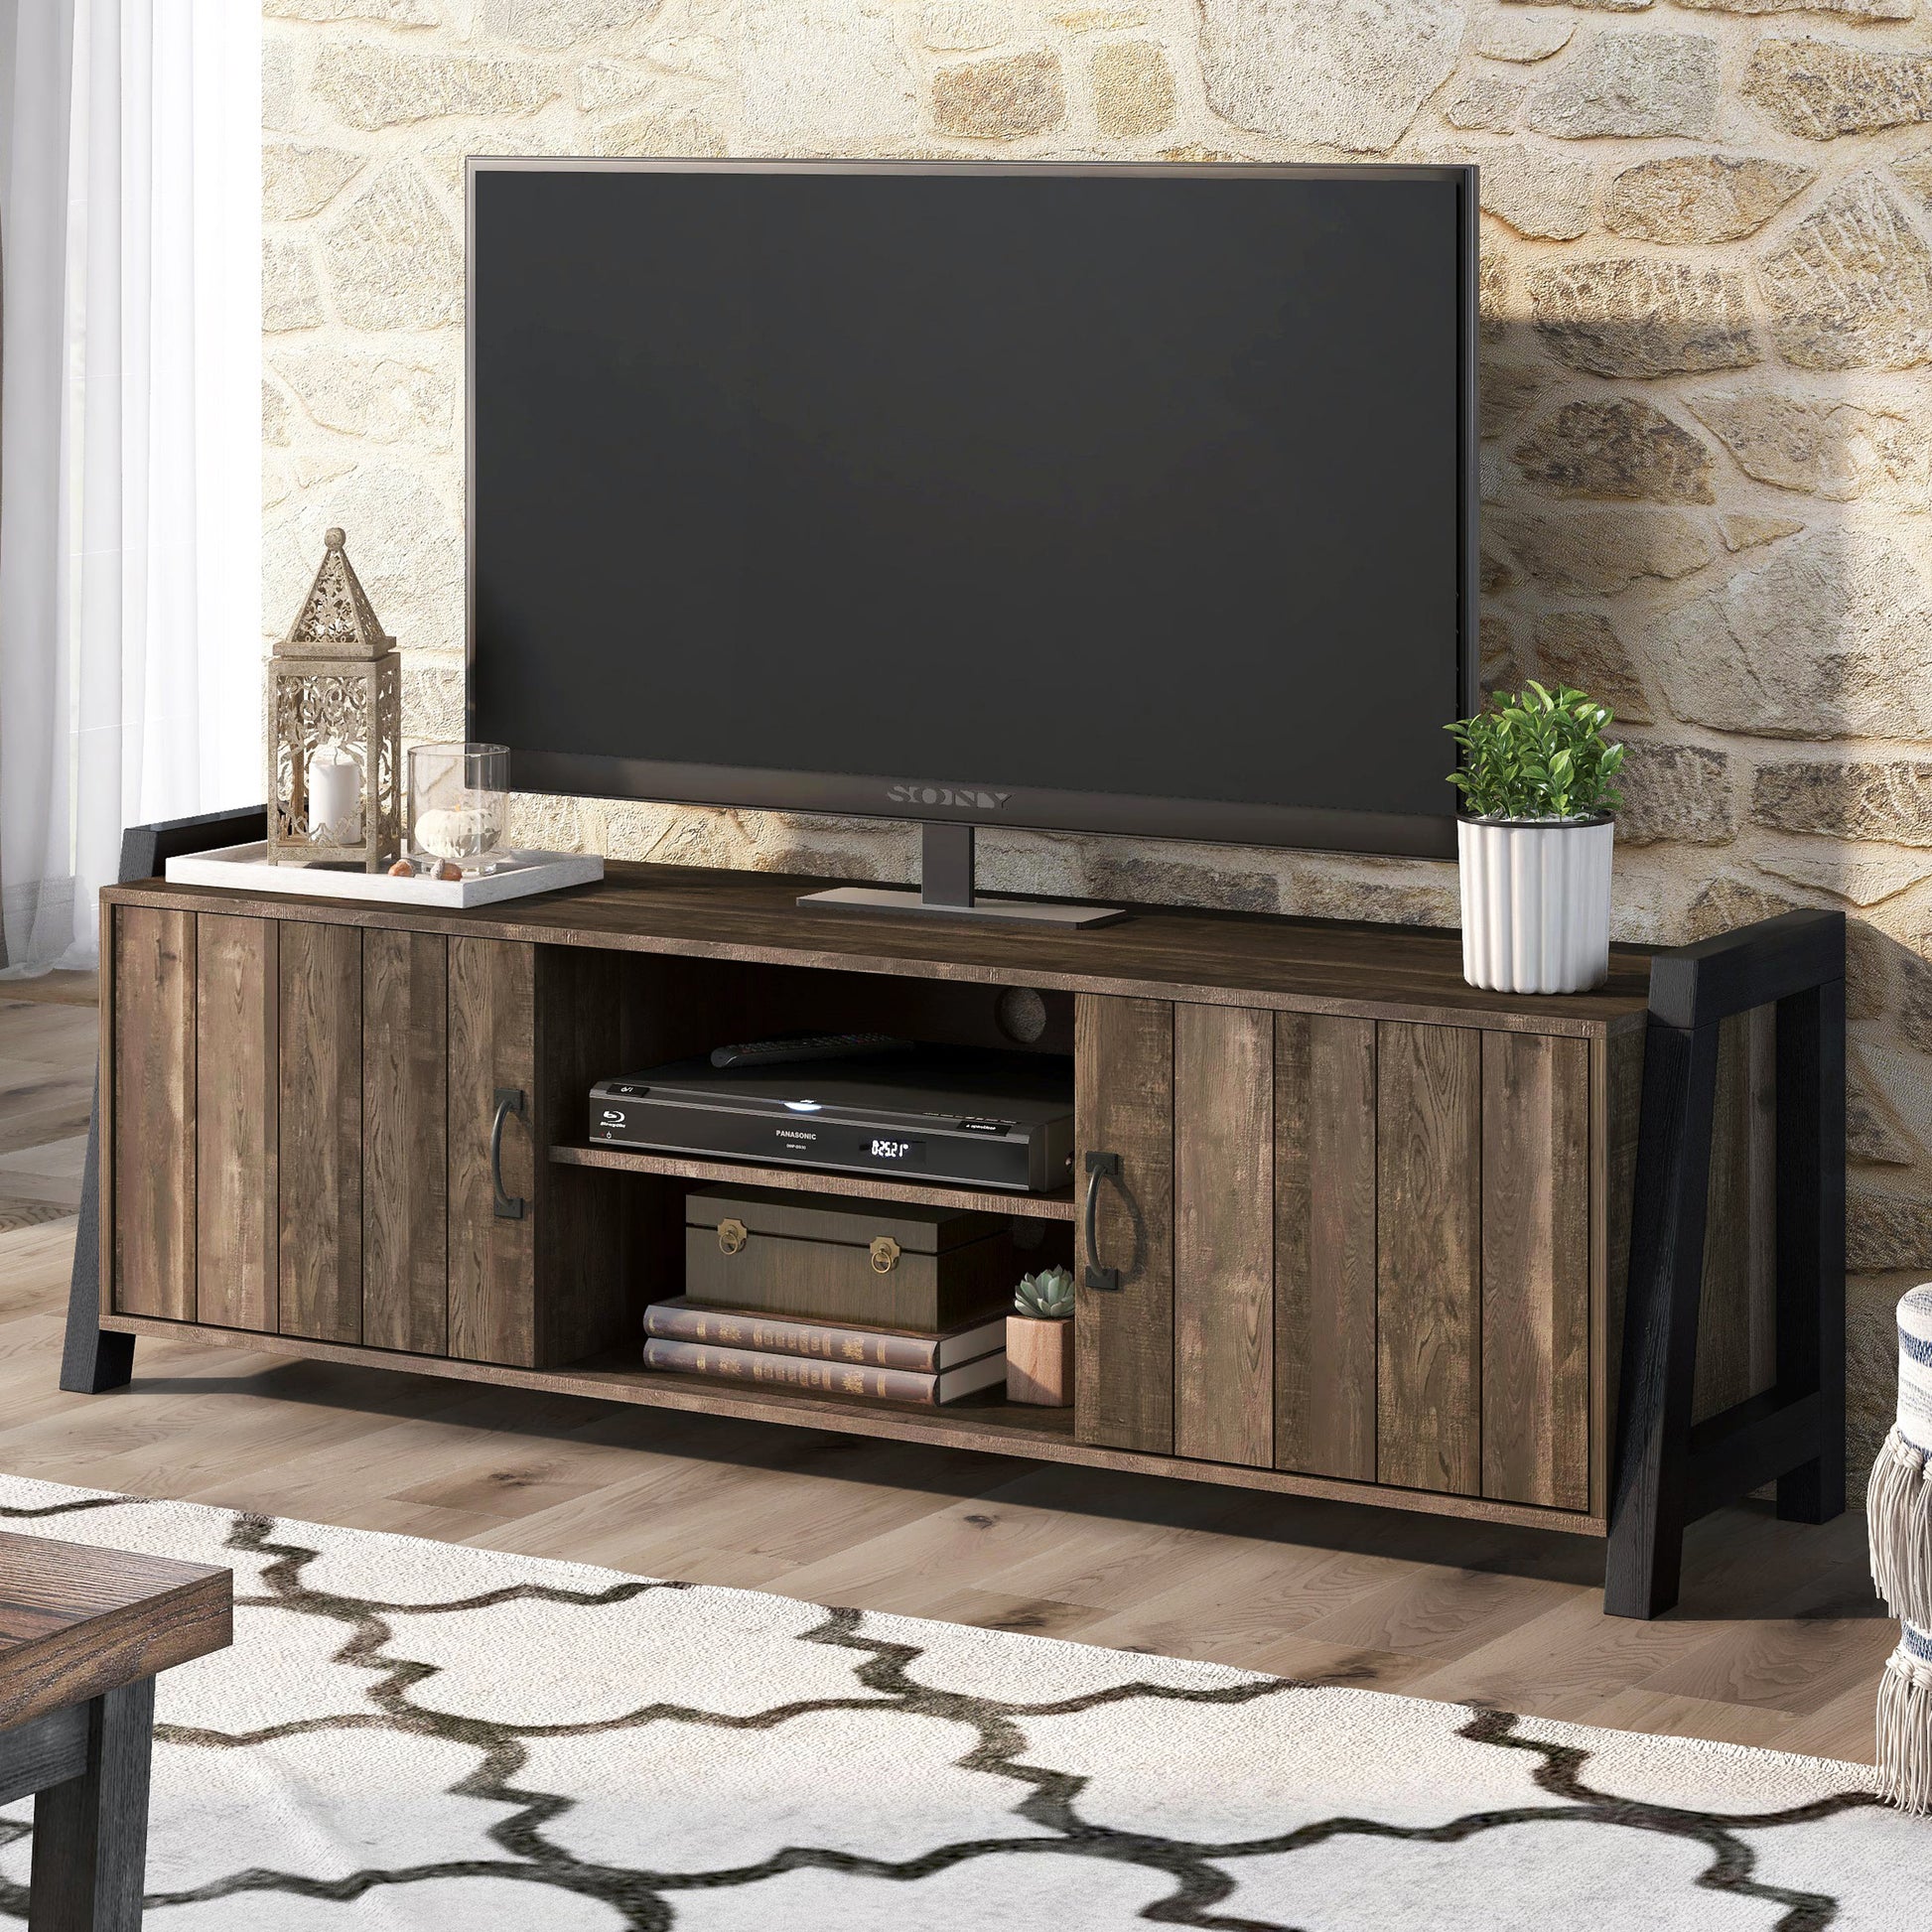 Left angled farmhouse reclaimed oak and black six-shelf TV stand in a living room with accessories